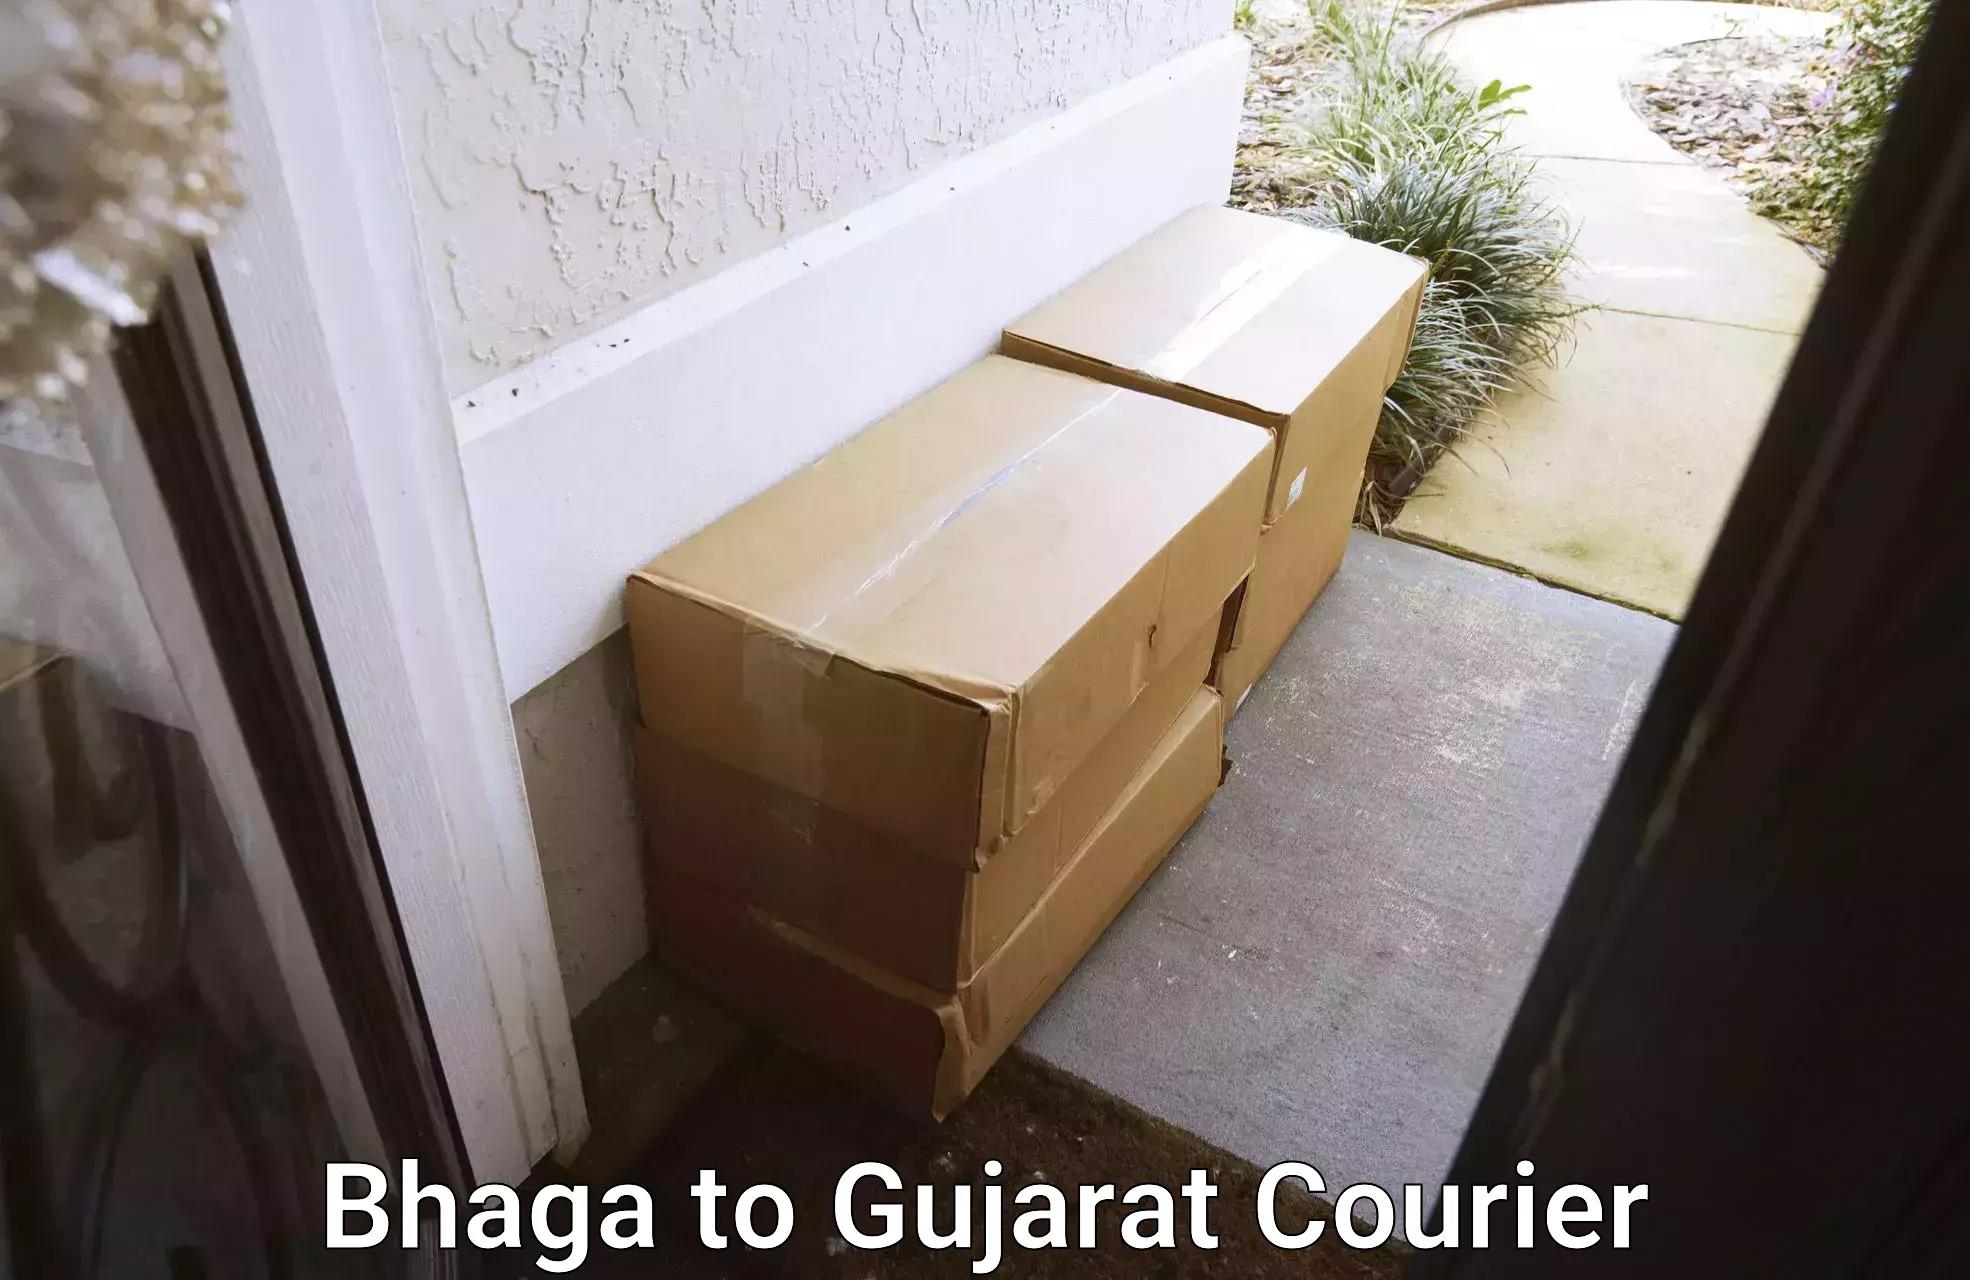 24-hour courier service Bhaga to Ahmedabad